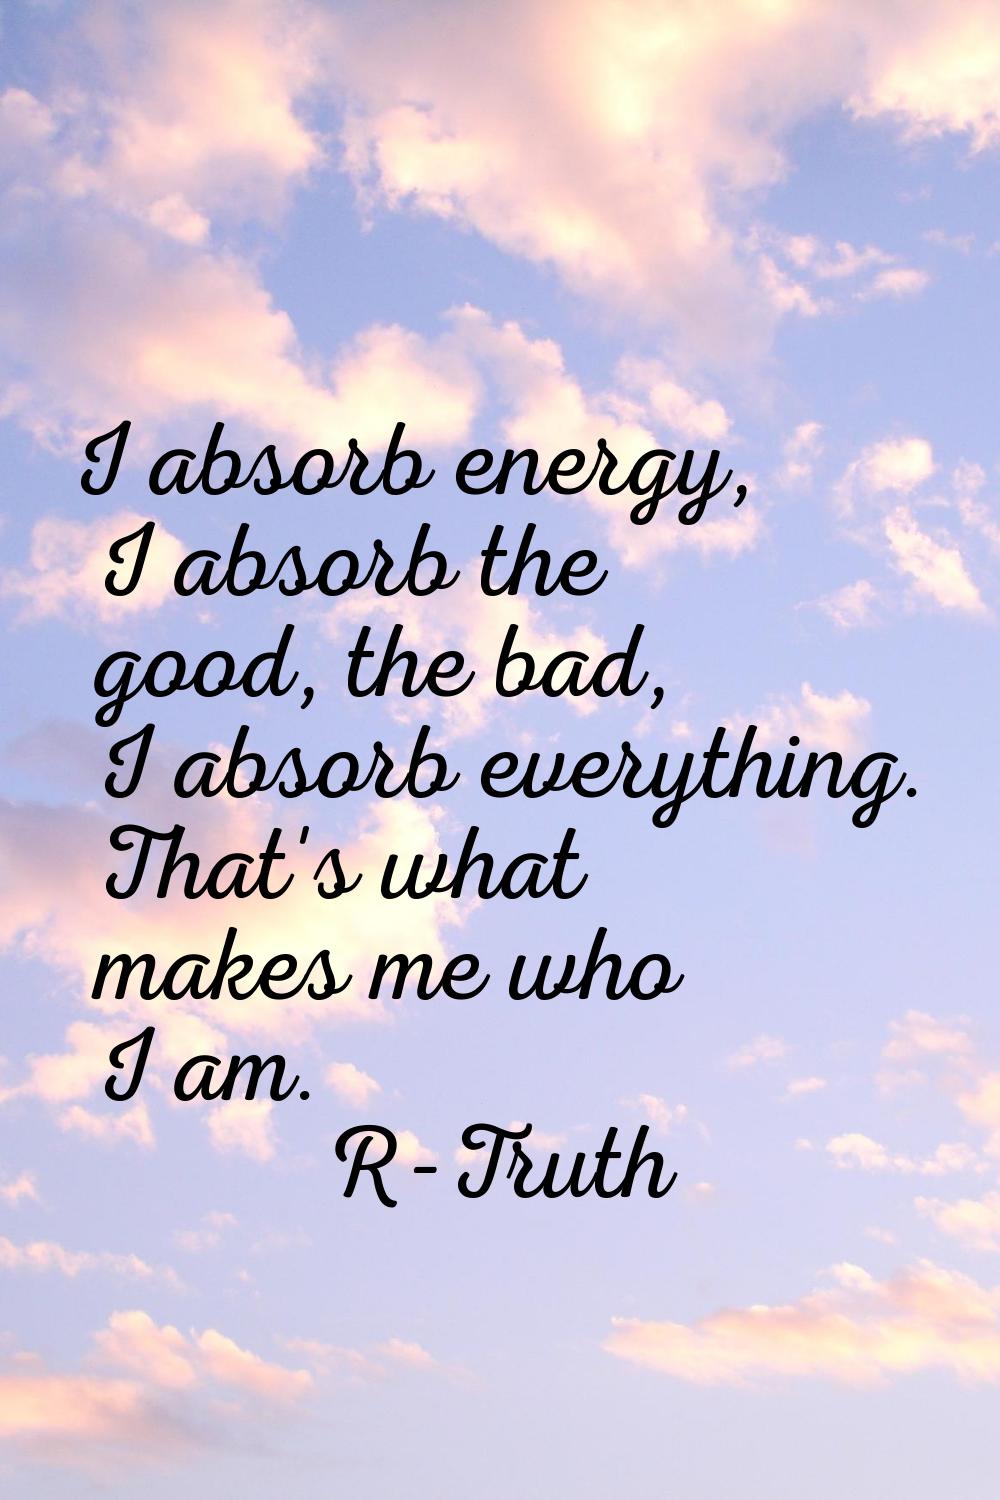 I absorb energy, I absorb the good, the bad, I absorb everything. That's what makes me who I am.